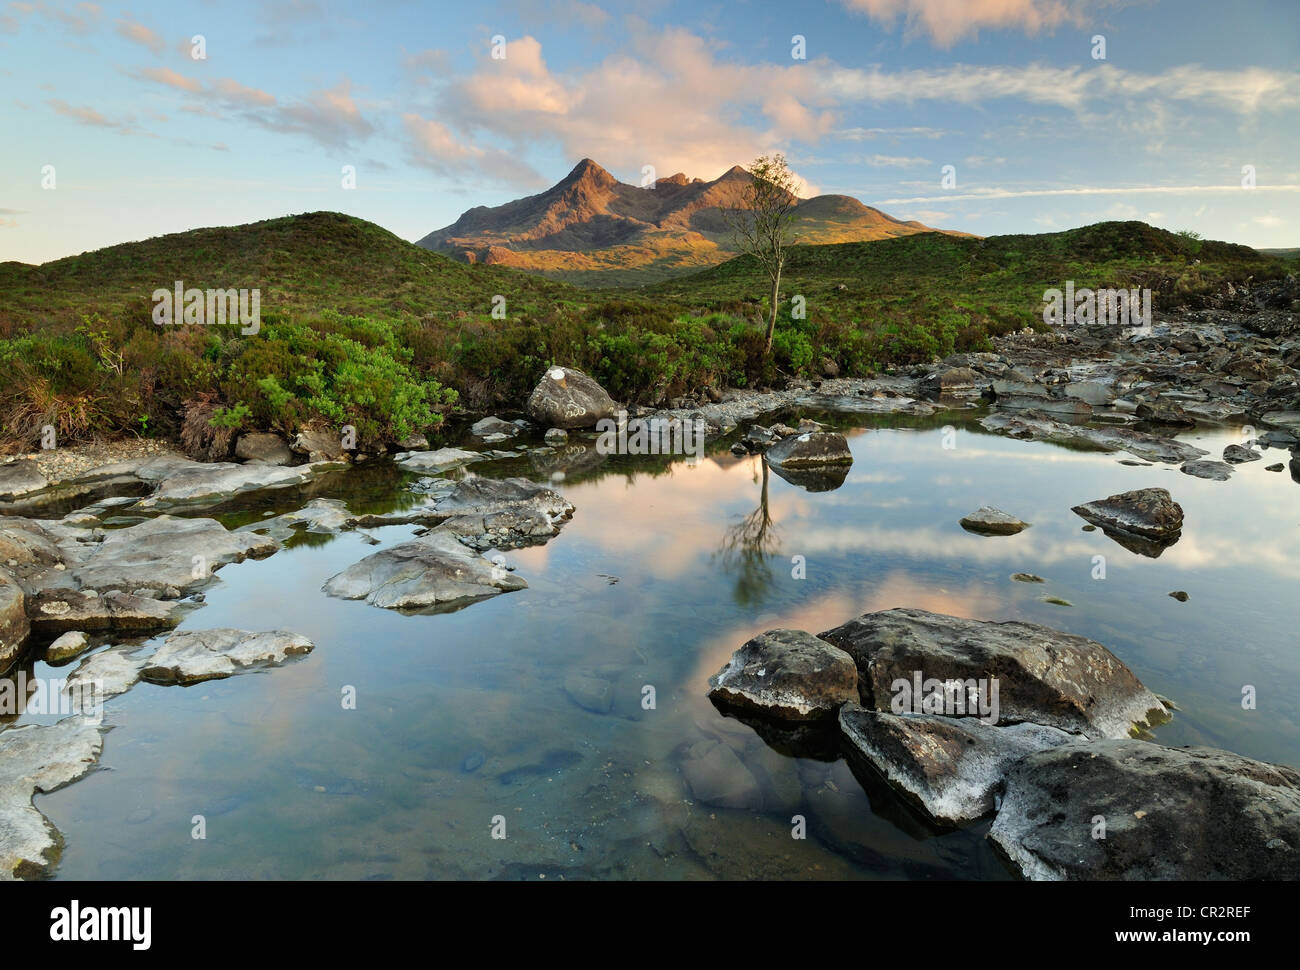 Calm pools on the Allt Dearg Mor on the Isle of Skye with the sunlit peaks of the Black Cuillin hills in the background Stock Photo